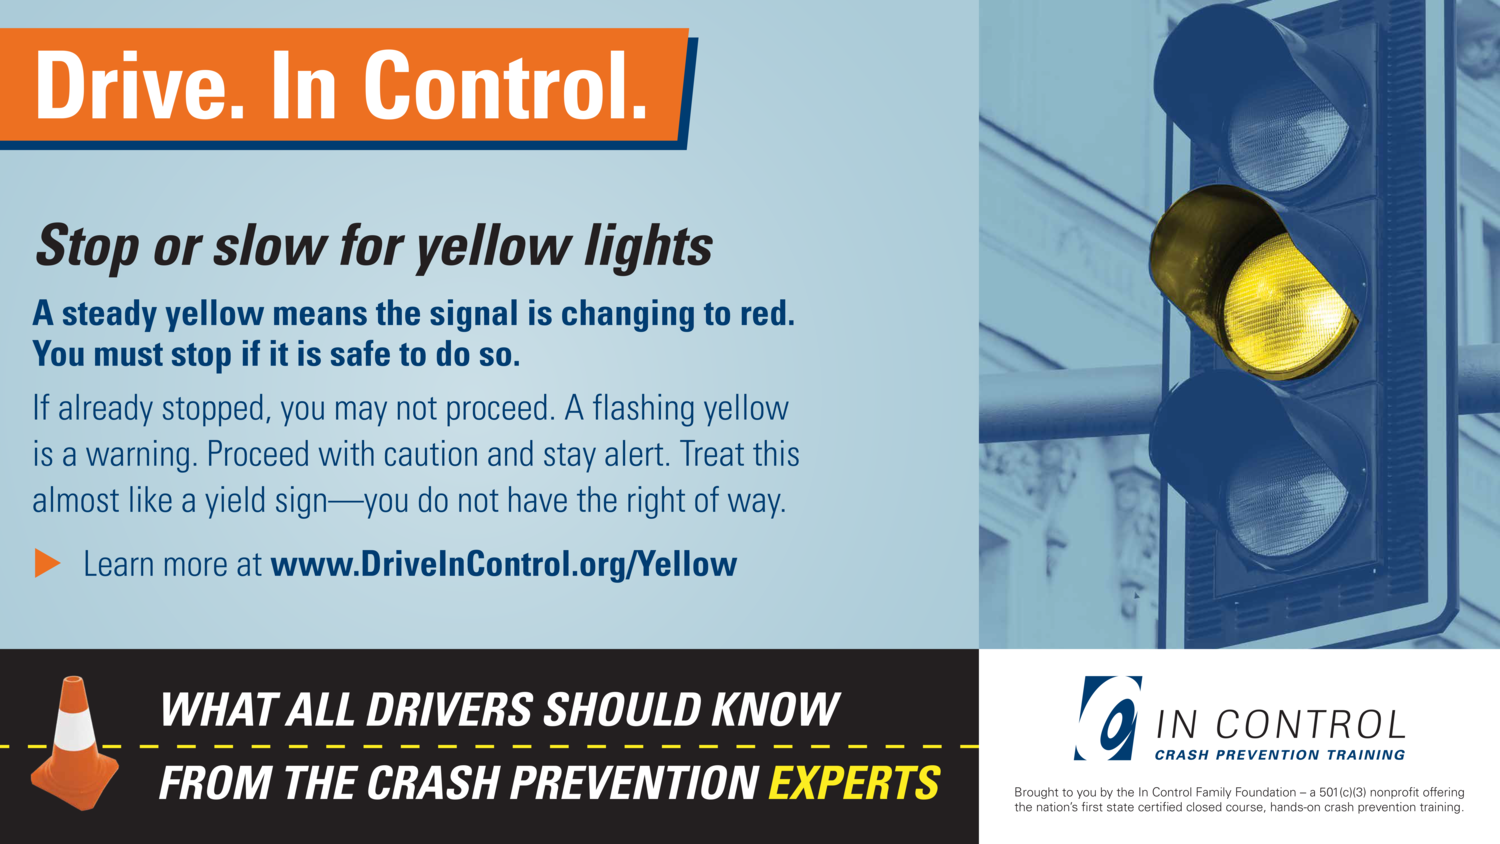 Why is yellow light safe?